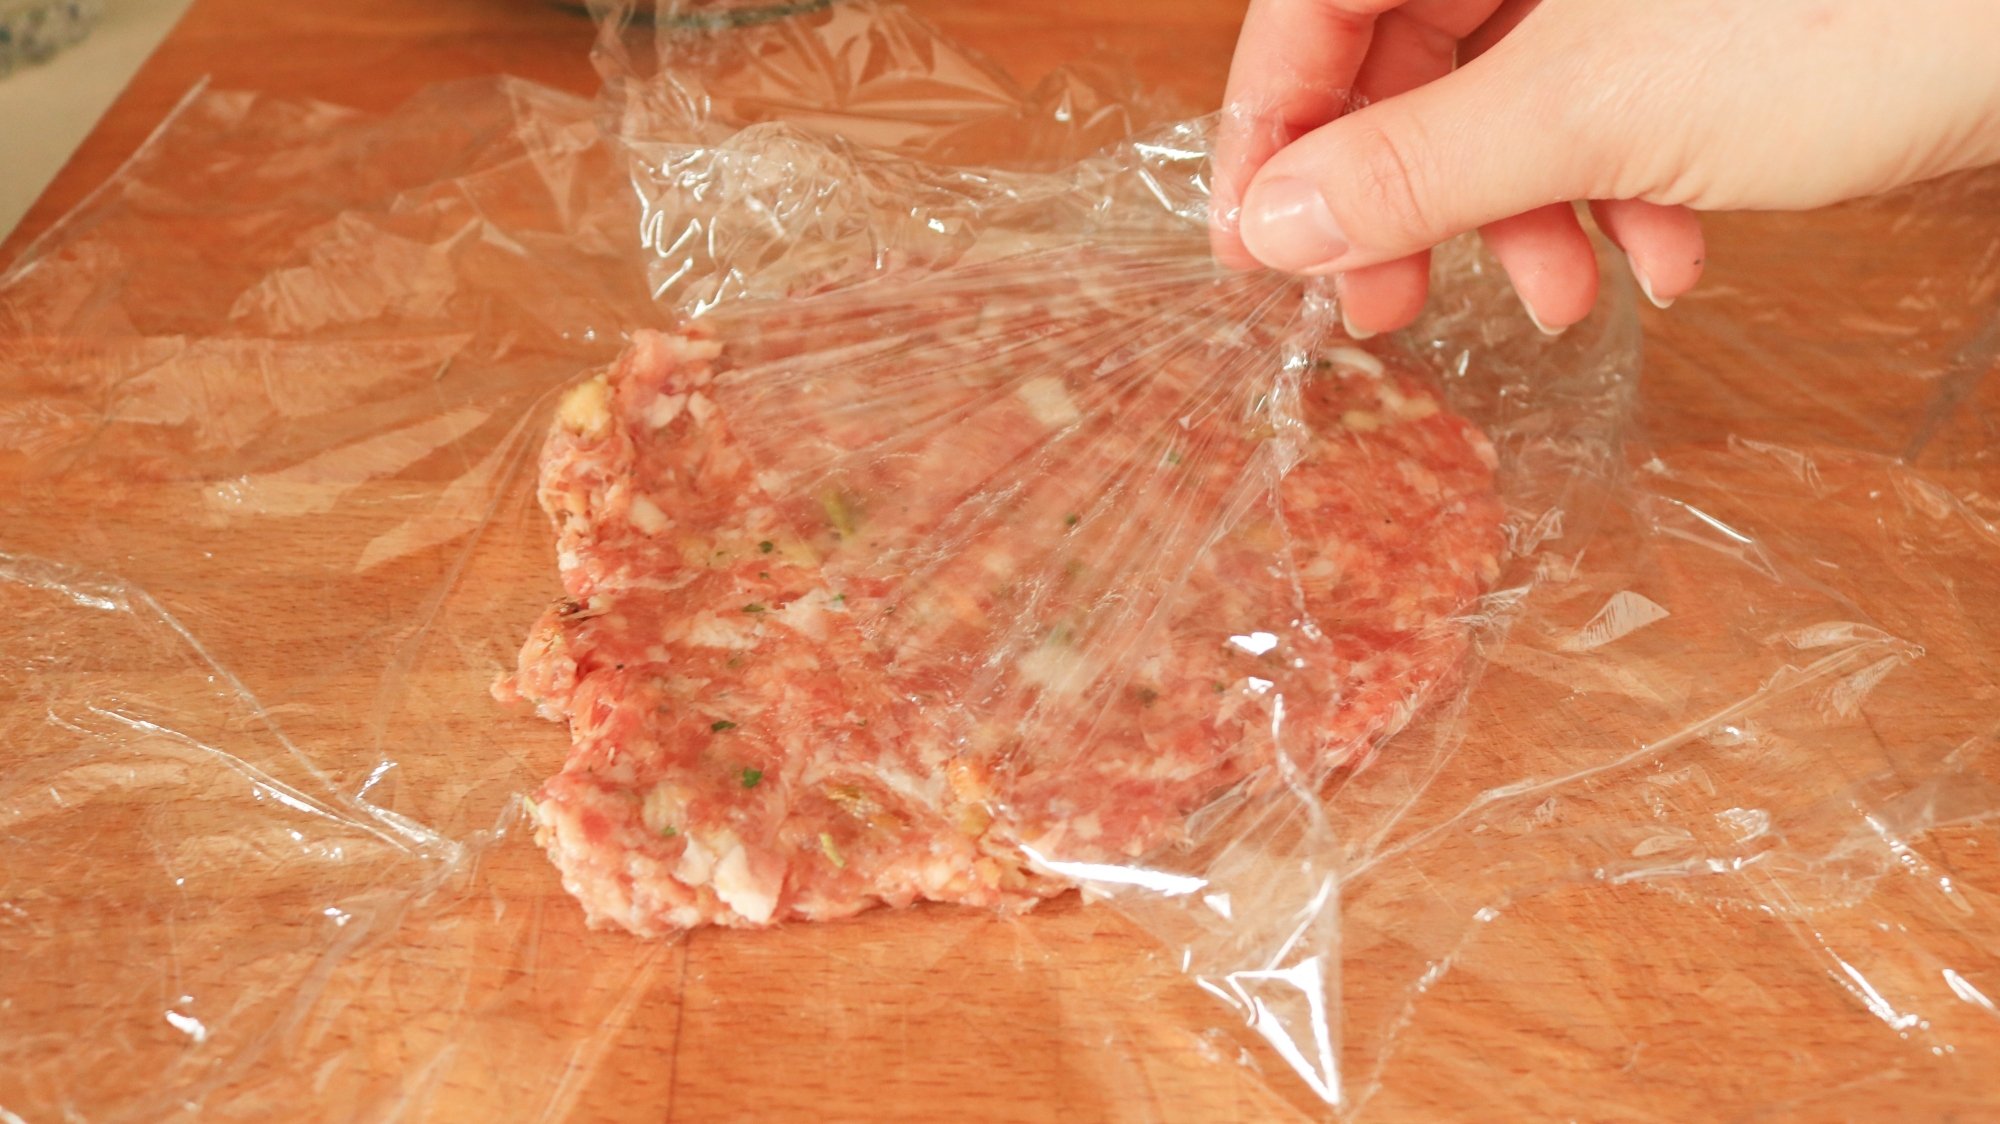 A hand peeling plastic wrap off of a sausage patty.